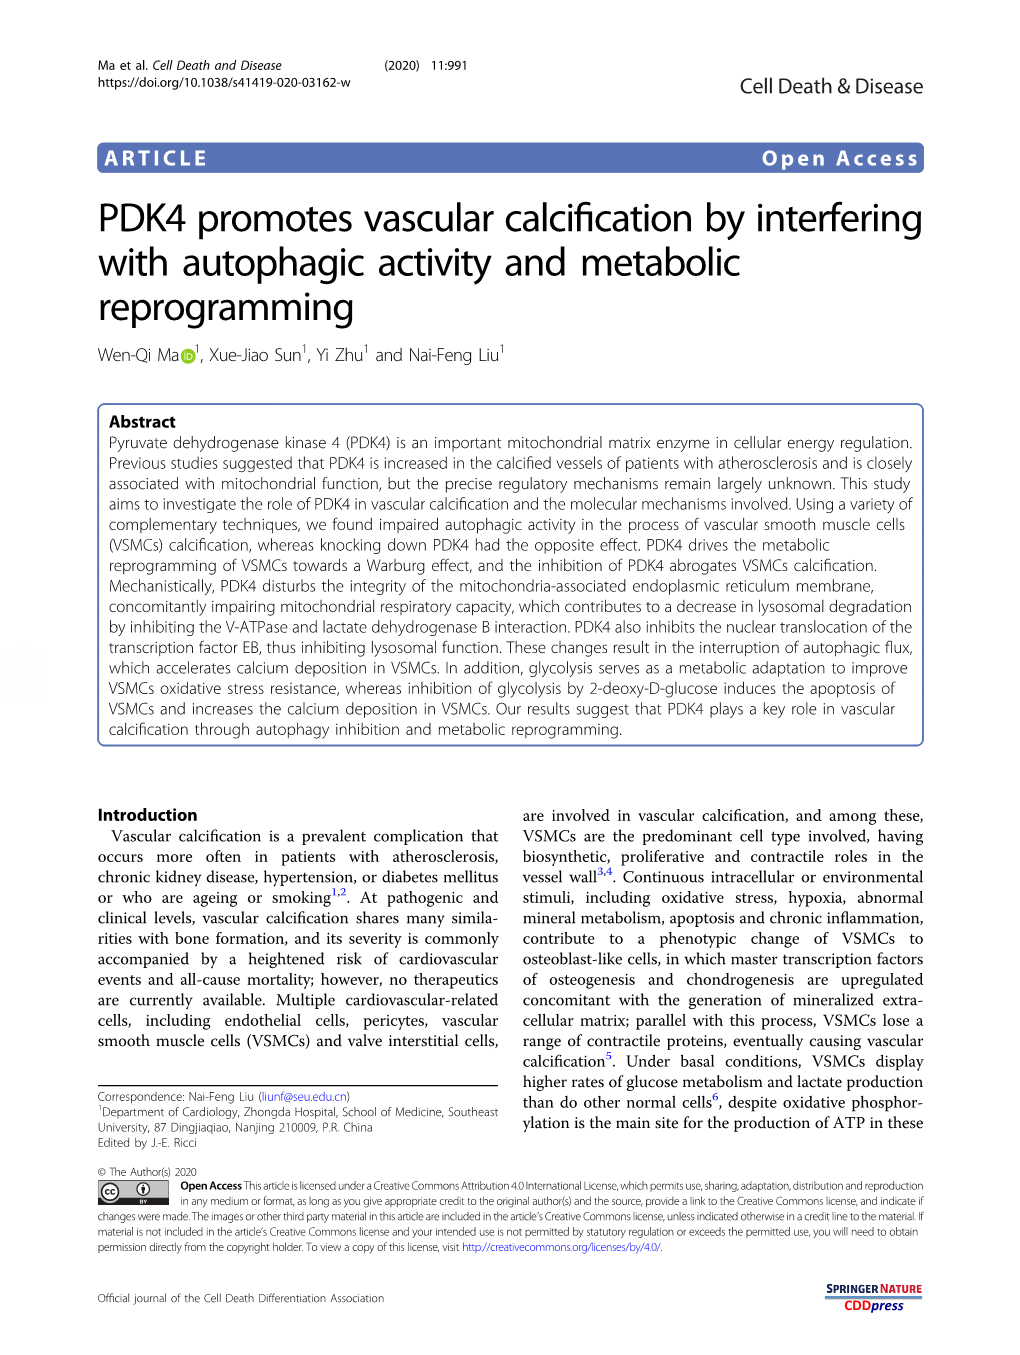 PDK4 Promotes Vascular Calcification by Interfering with Autophagic